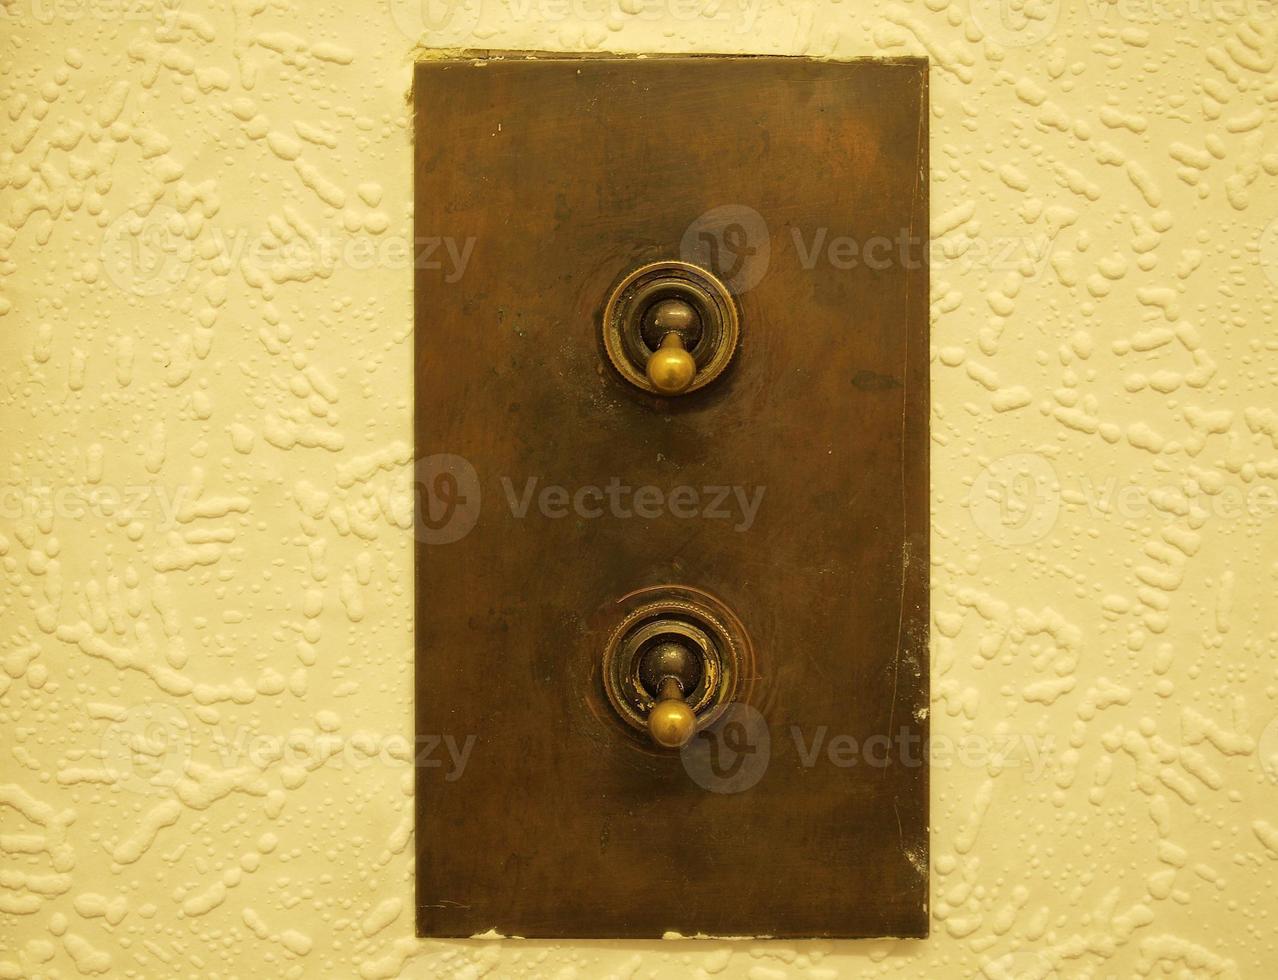 https://static.vecteezy.com/system/resources/previews/005/731/145/non_2x/vintage-light-switch-photo.jpg